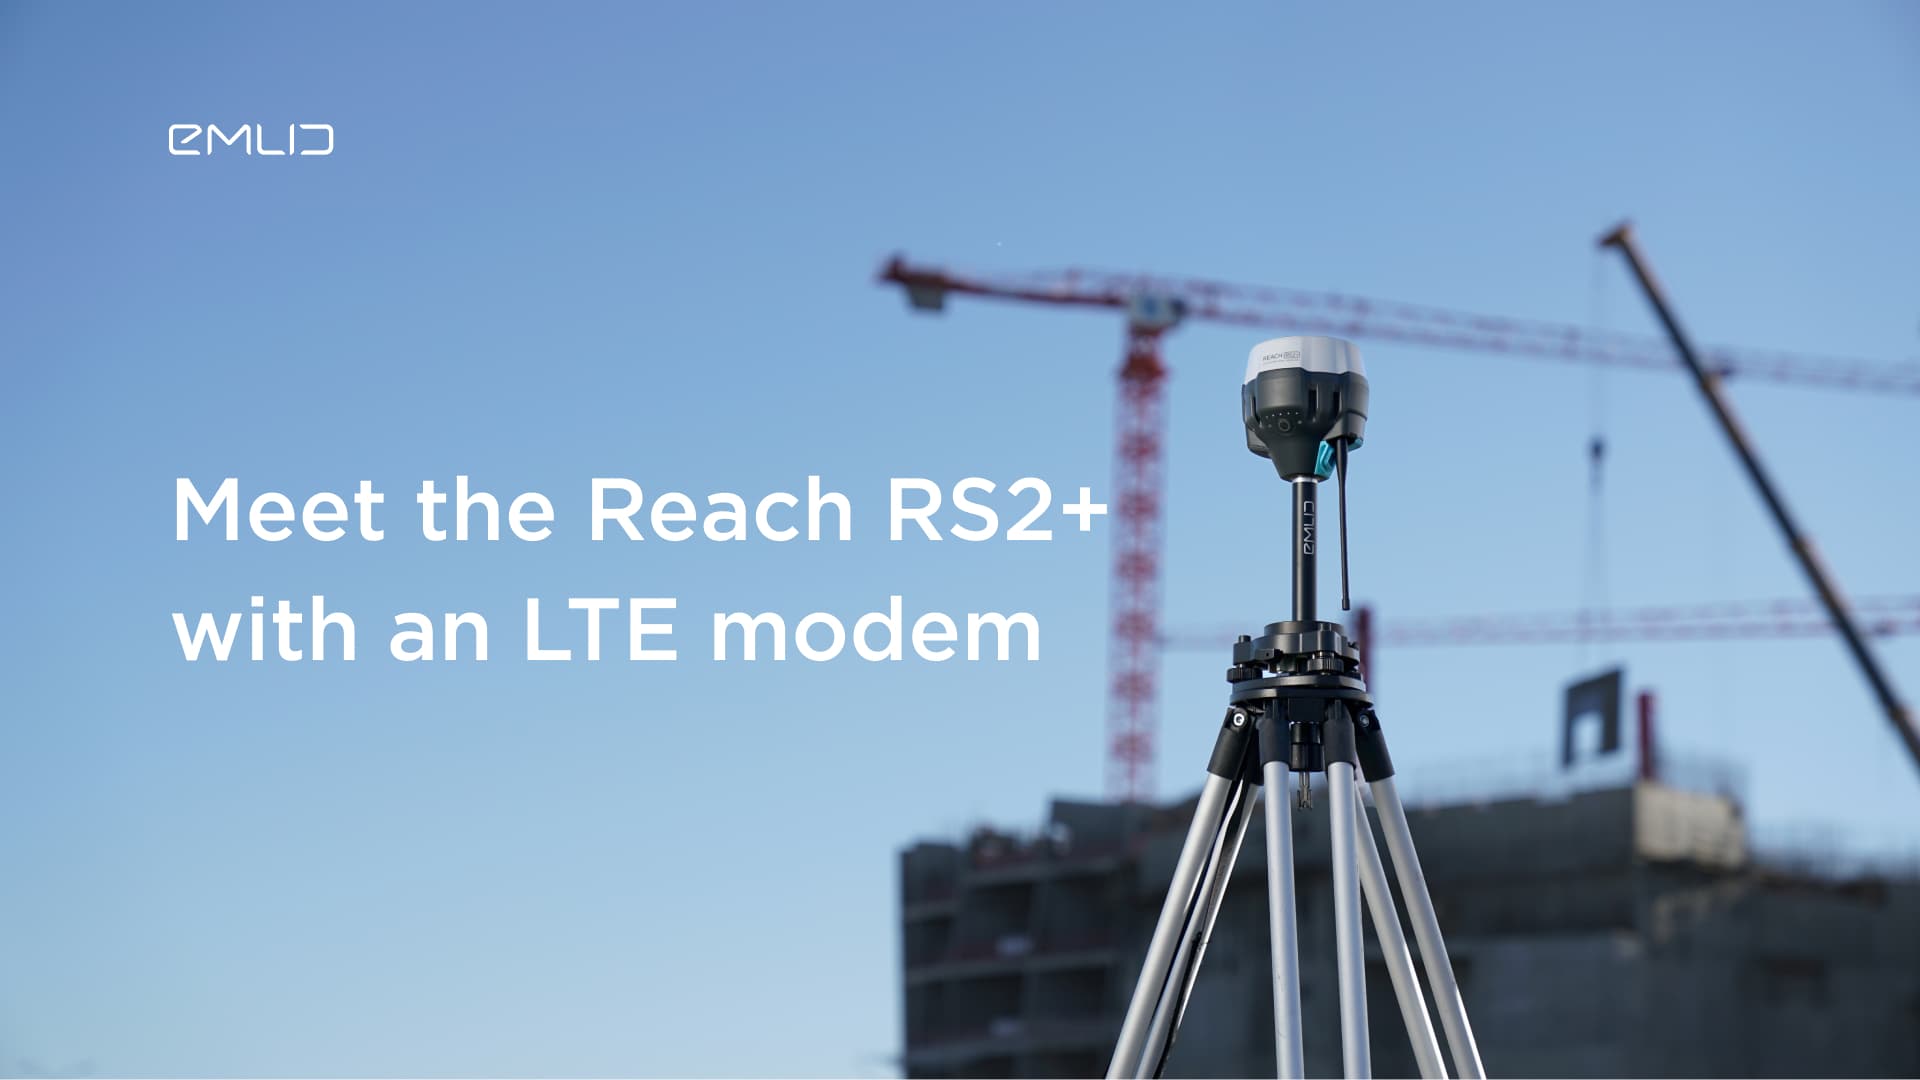 The new Reach RS2+ with LTE - News - Emlid Community Forum